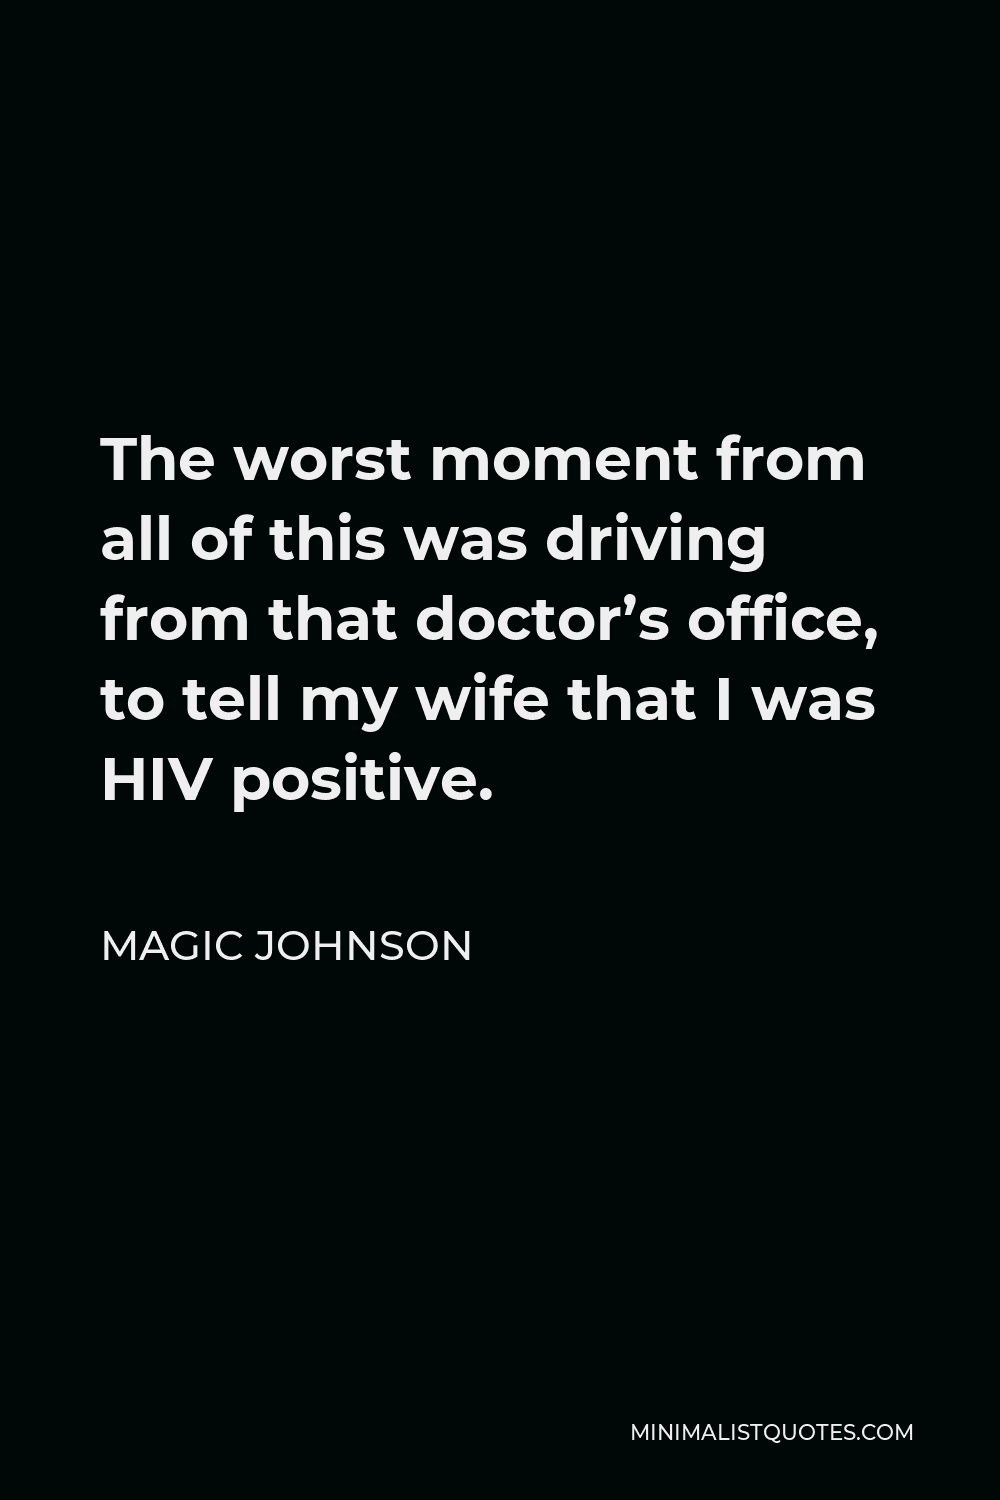 Magic Johnson Quote - The worst moment from all of this was driving from that doctor’s office, to tell my wife that I was HIV positive.